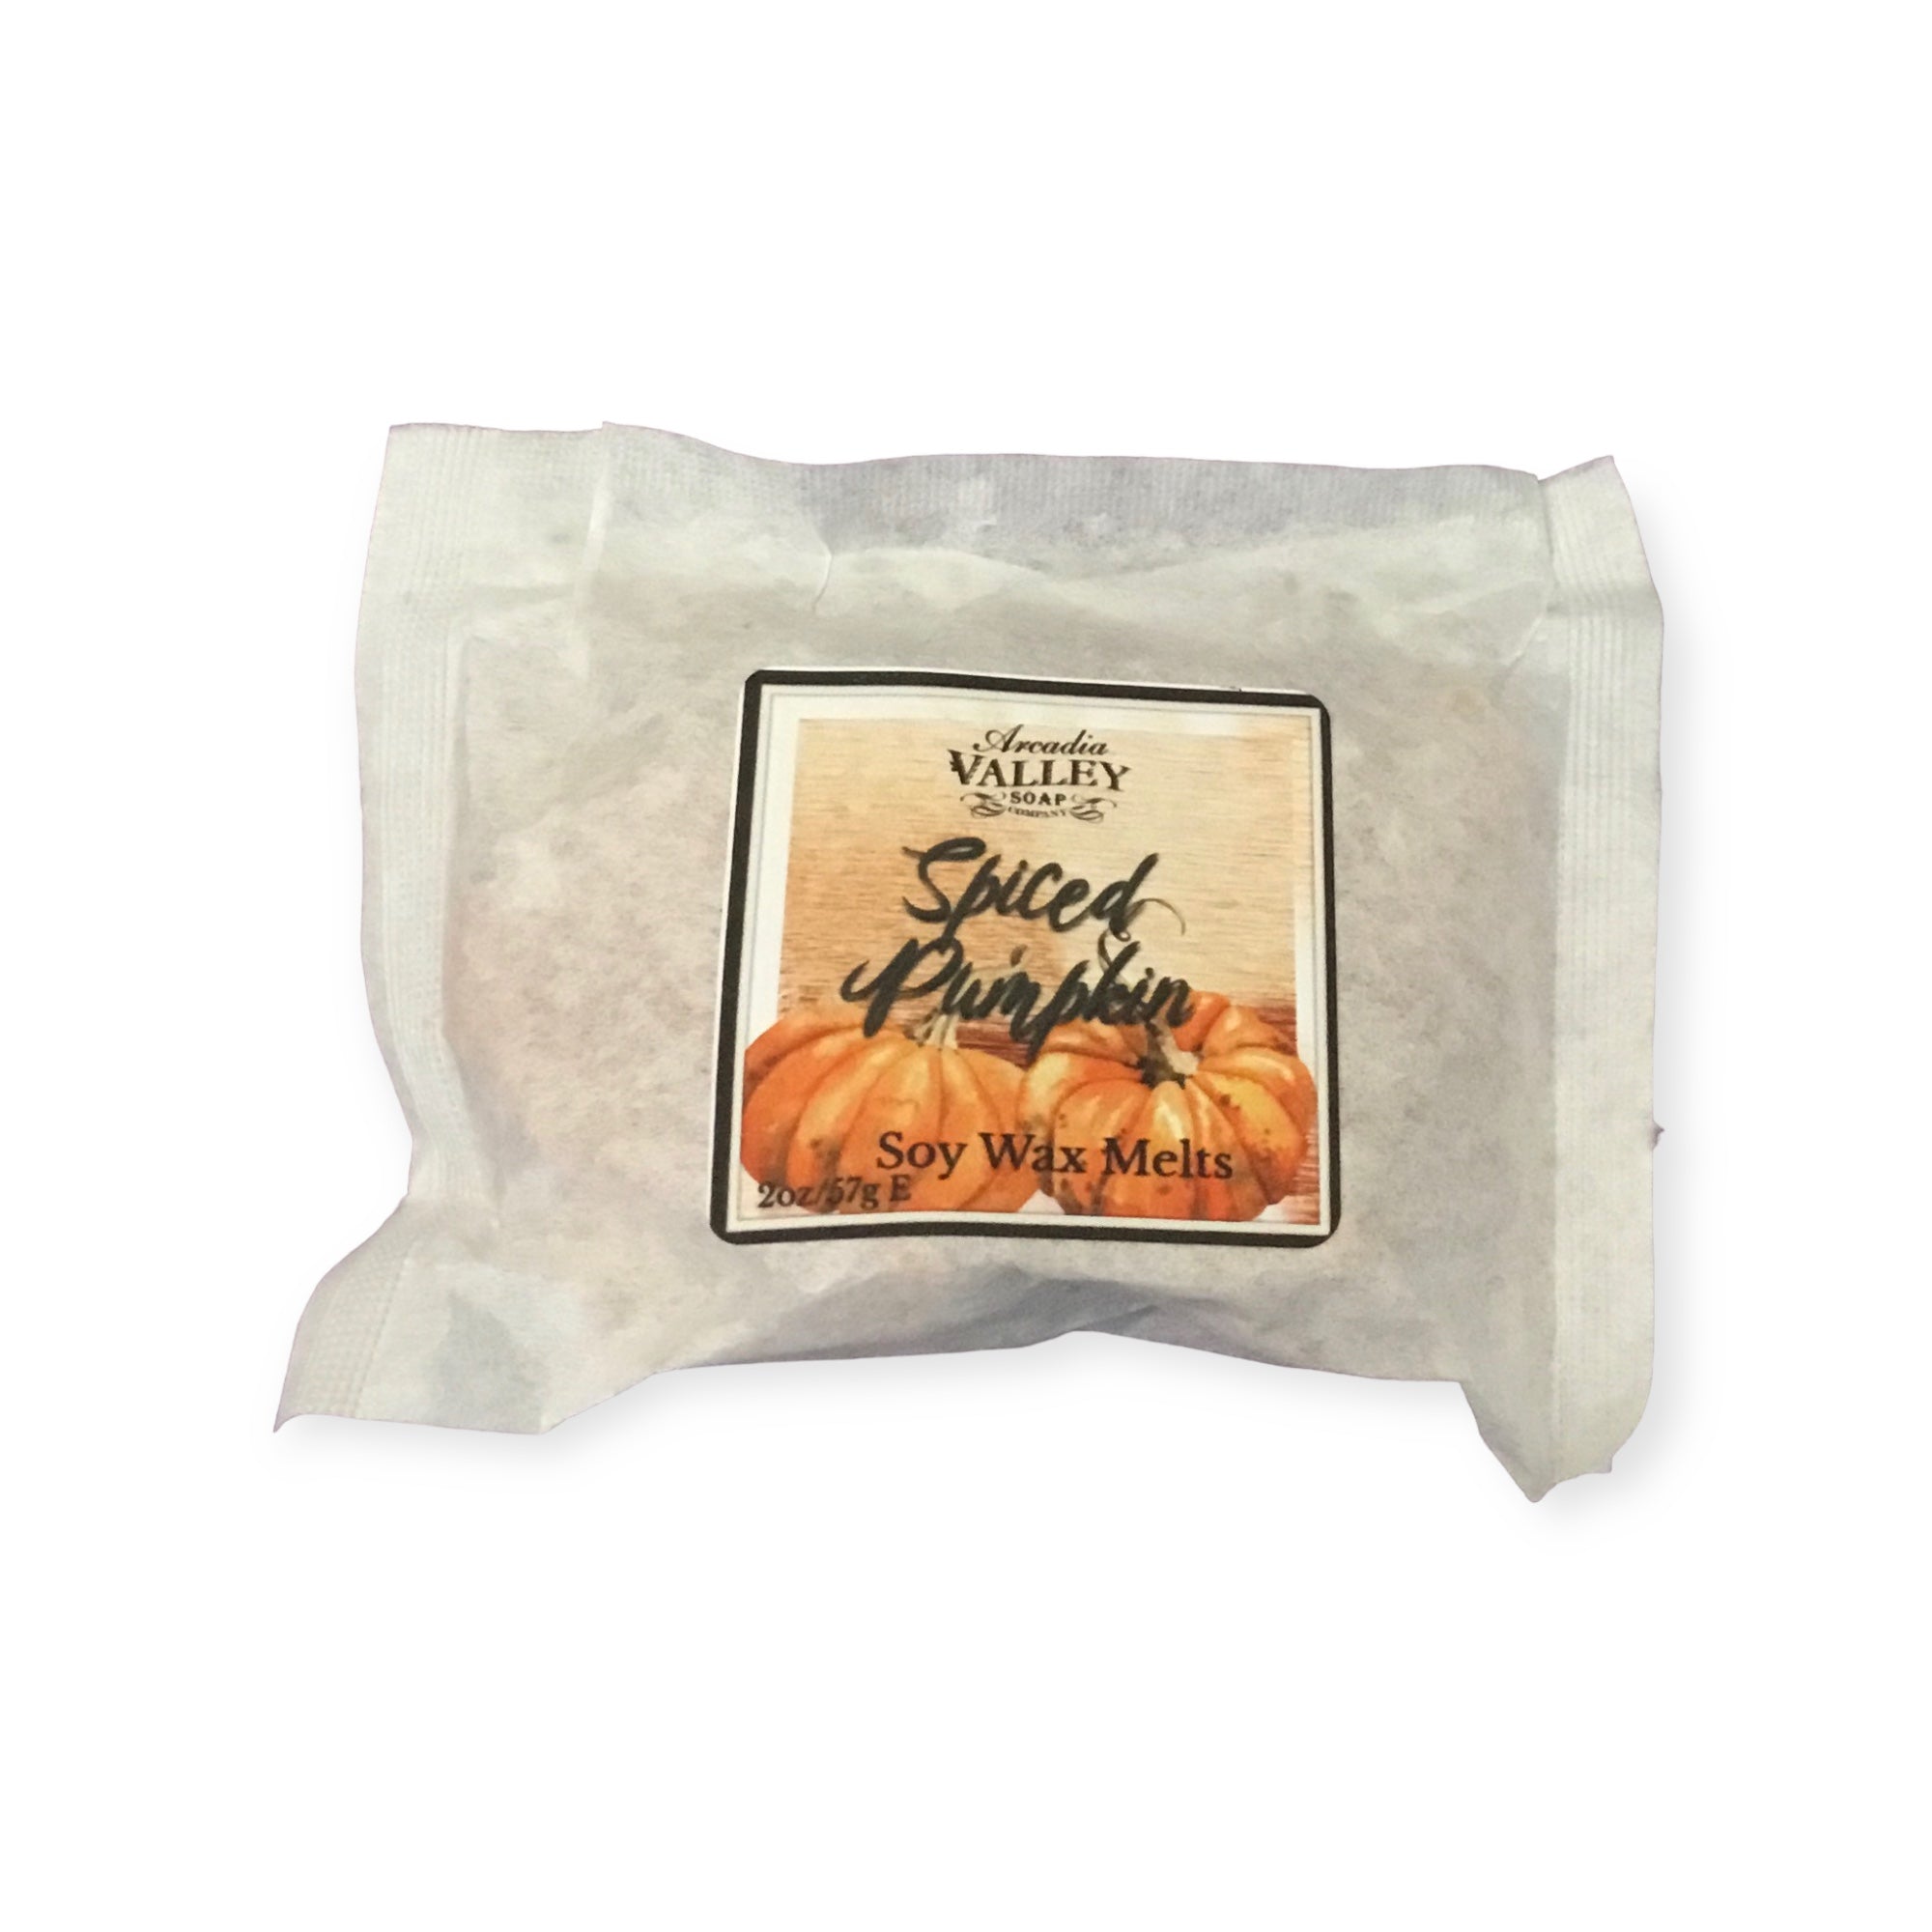 Spiced Pumpkin wax melts packed in a white, lightweight paper pouch with decorative label on a white background